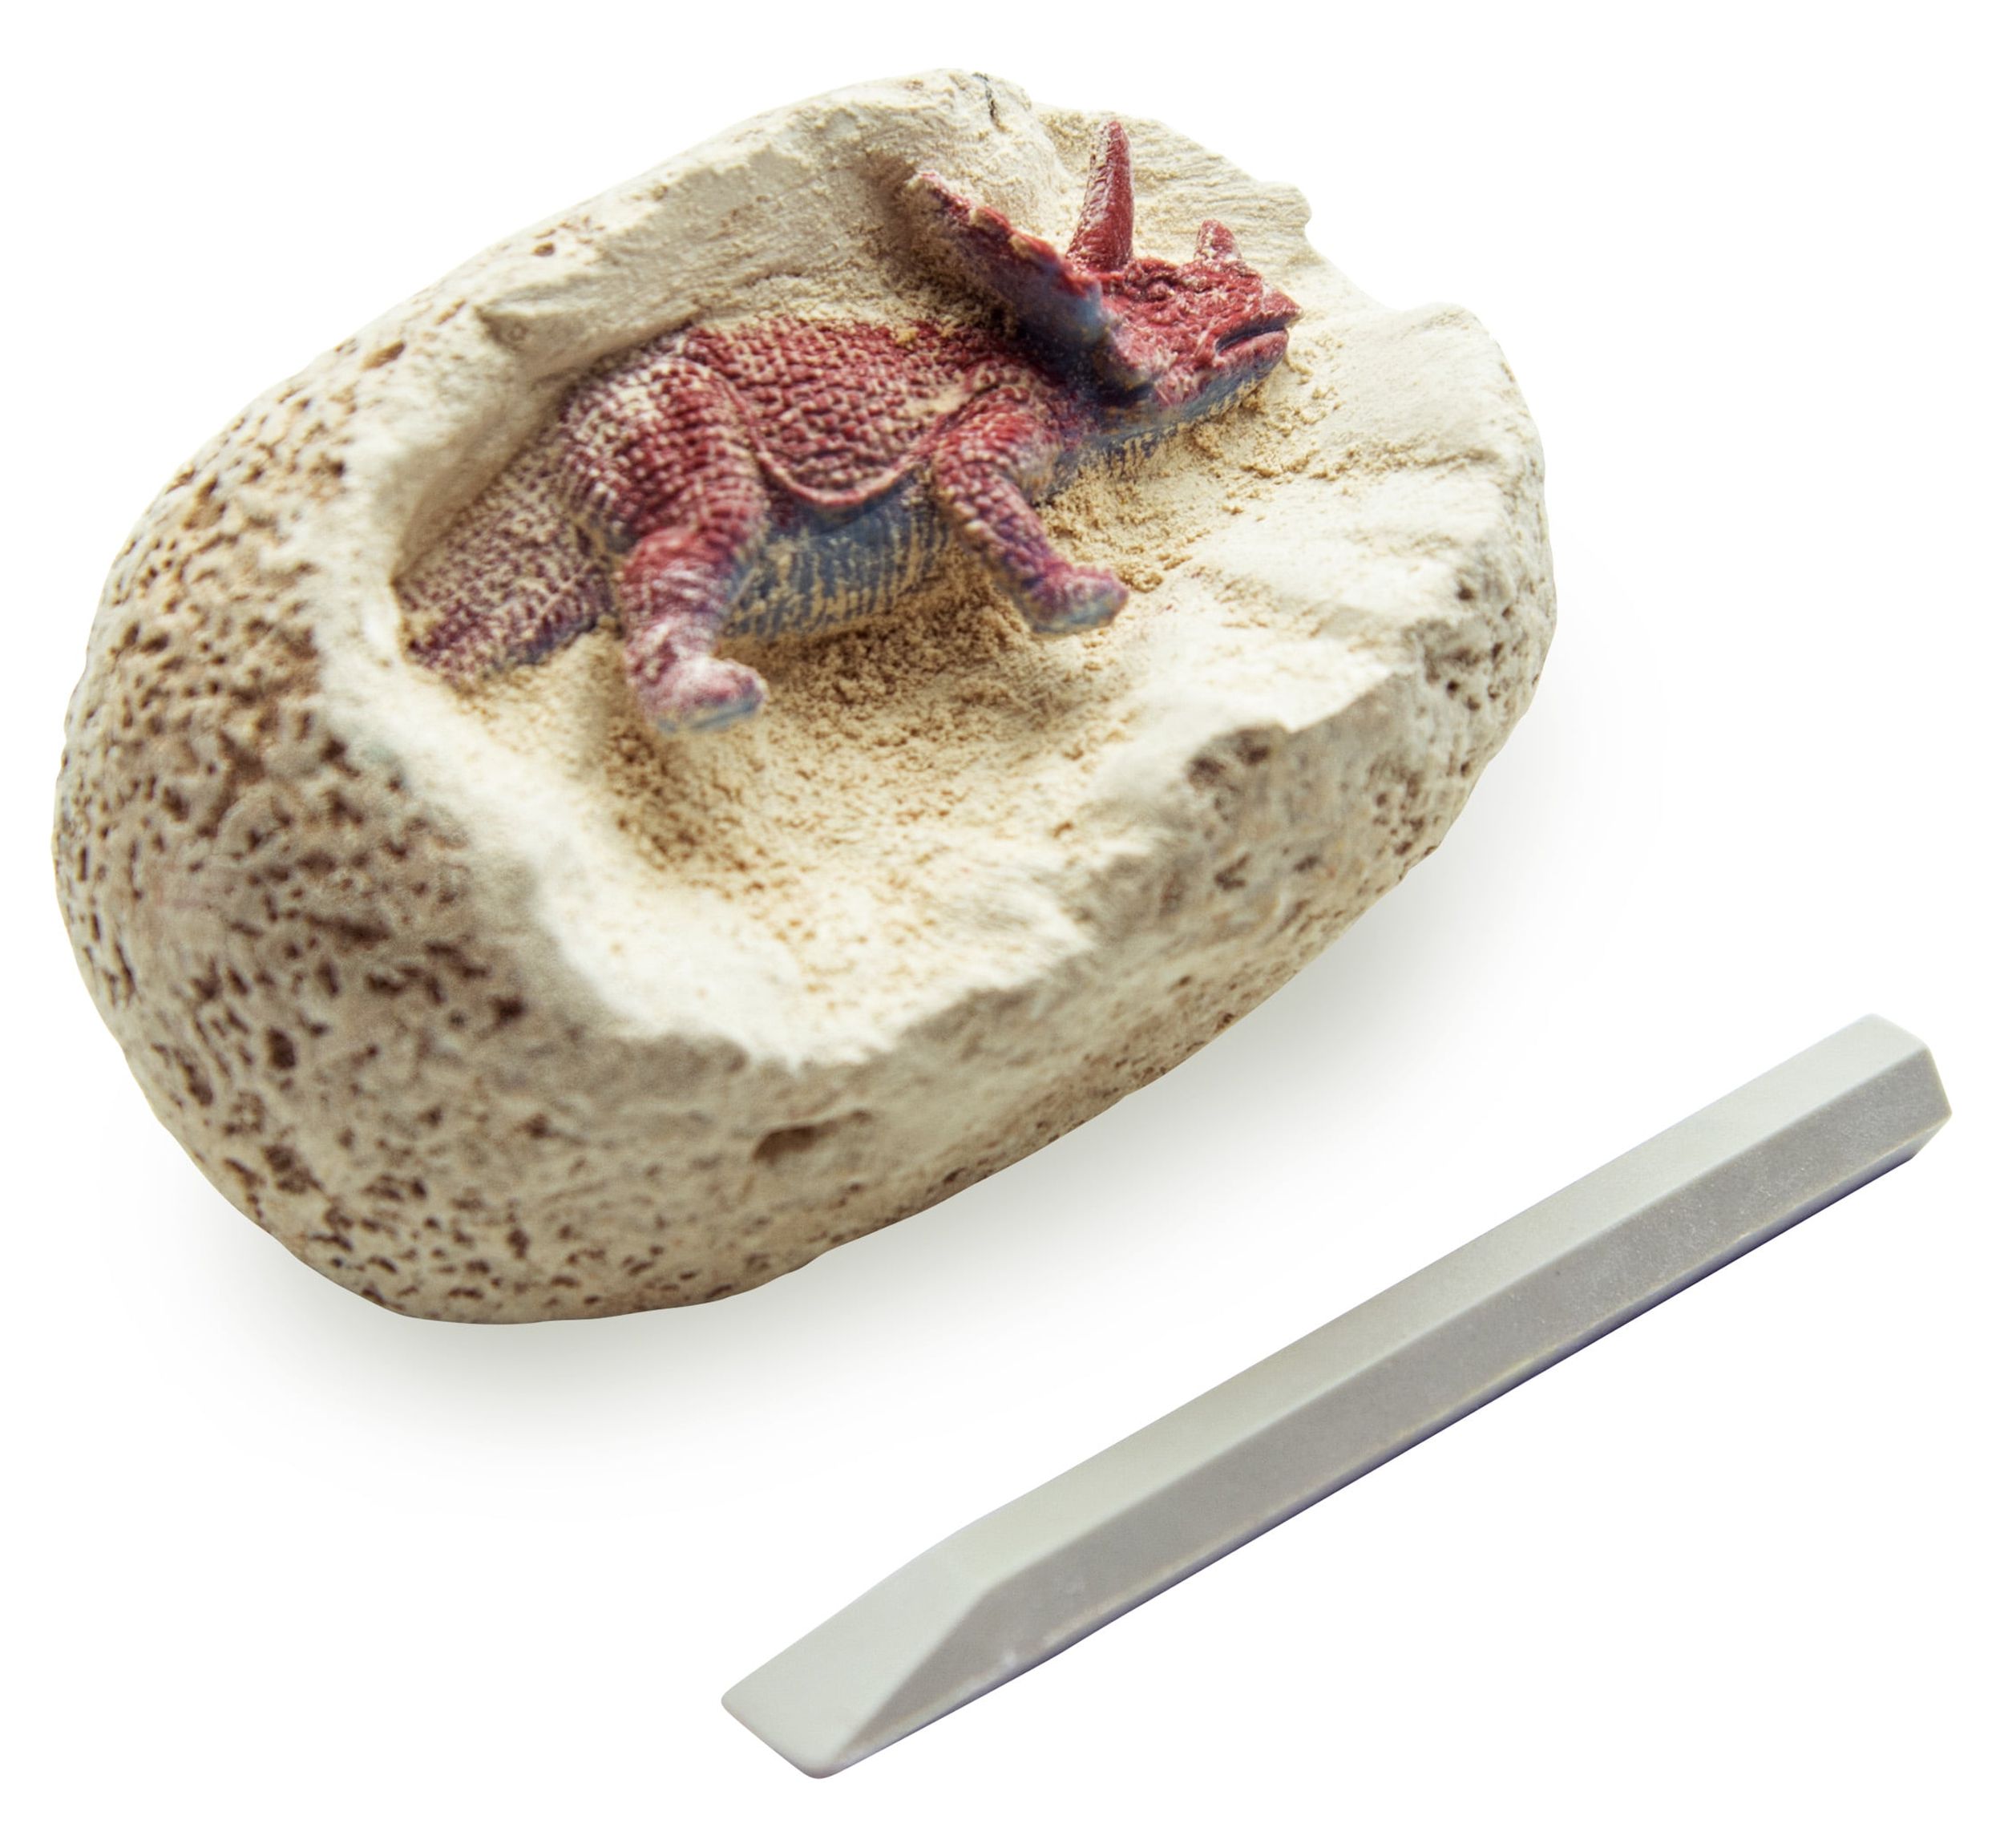 Thames & Kosmos I Dig It! Dino - Egg Excavation Kit, Styles May Vary, Unisex, Ages 5+ - image 1 of 5